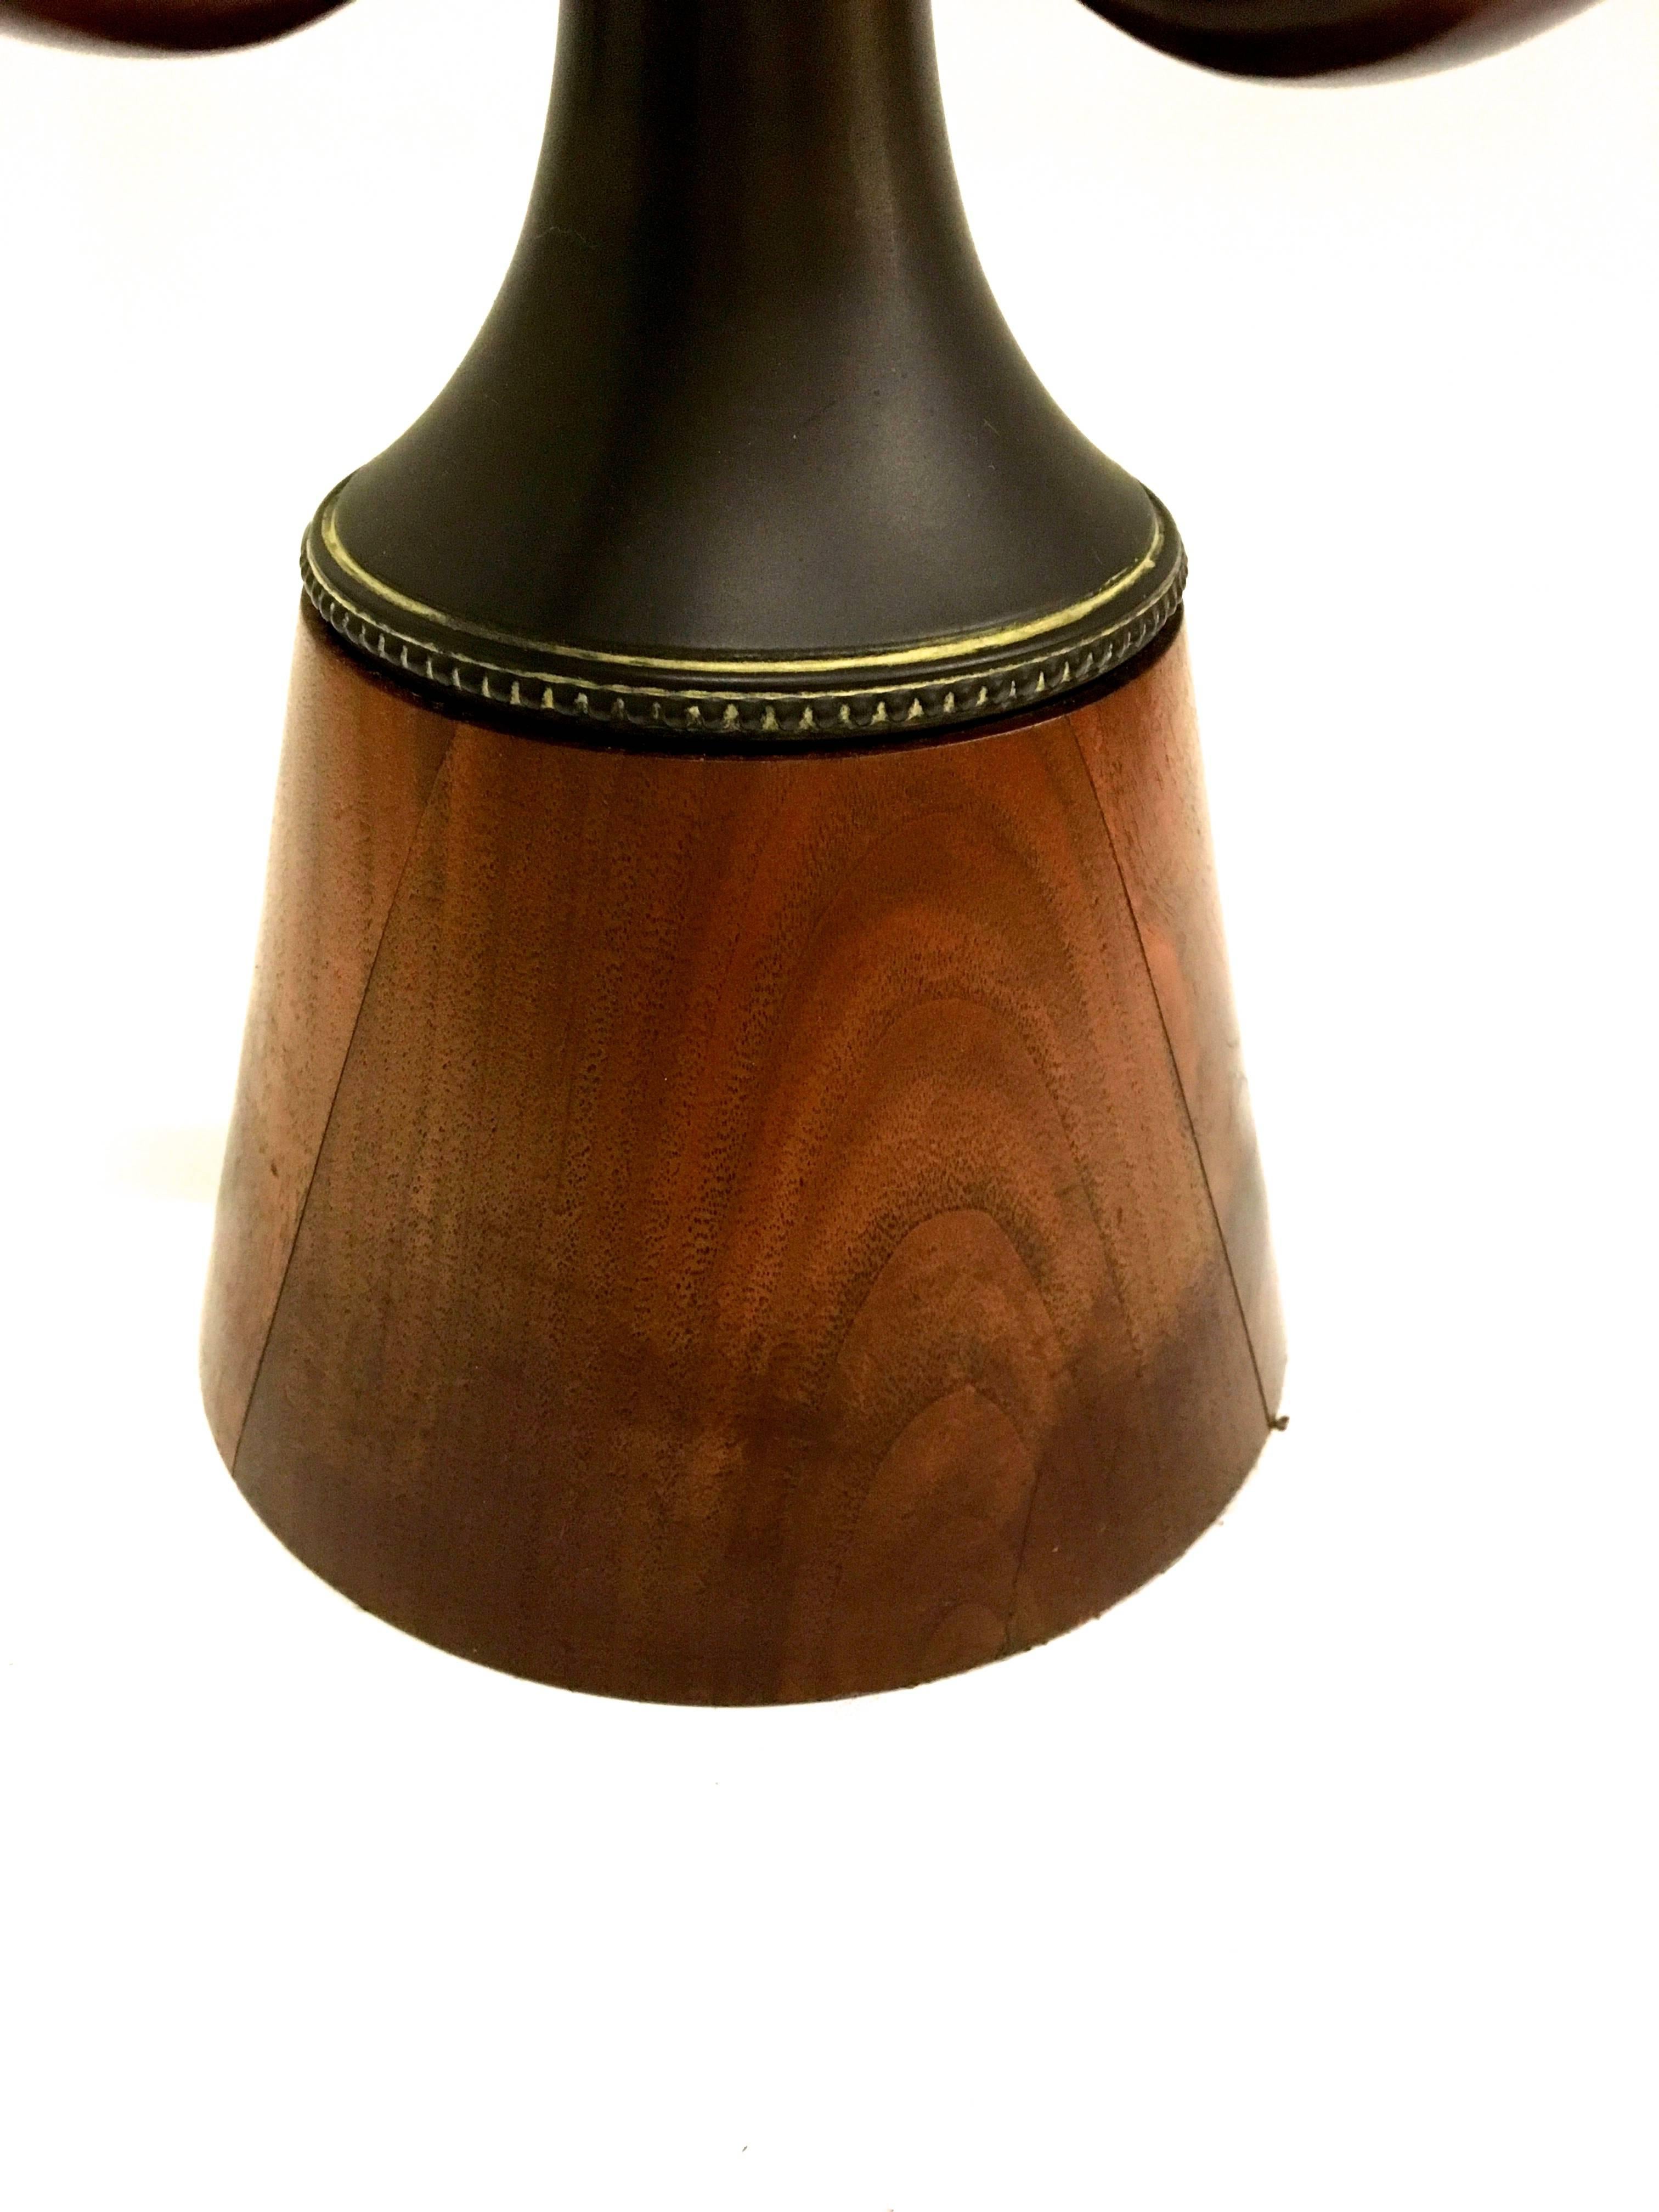 Ornate Mid Century Modern Lamp - Walnut 1960s/1970s  In Excellent Condition For Sale In Boca Raton, FL